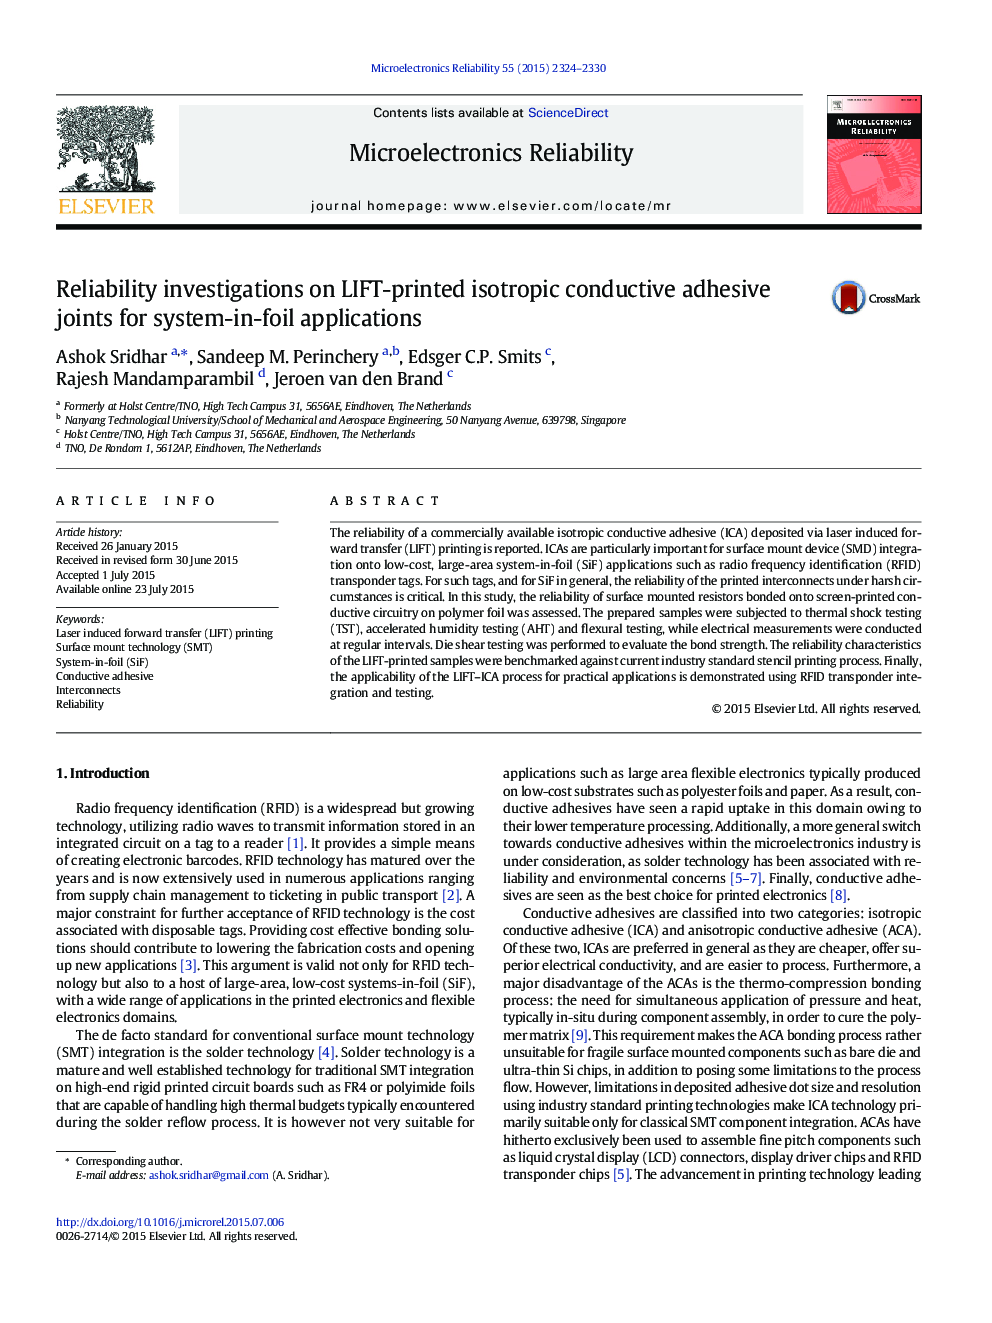 Reliability investigations on LIFT-printed isotropic conductive adhesive joints for system-in-foil applications